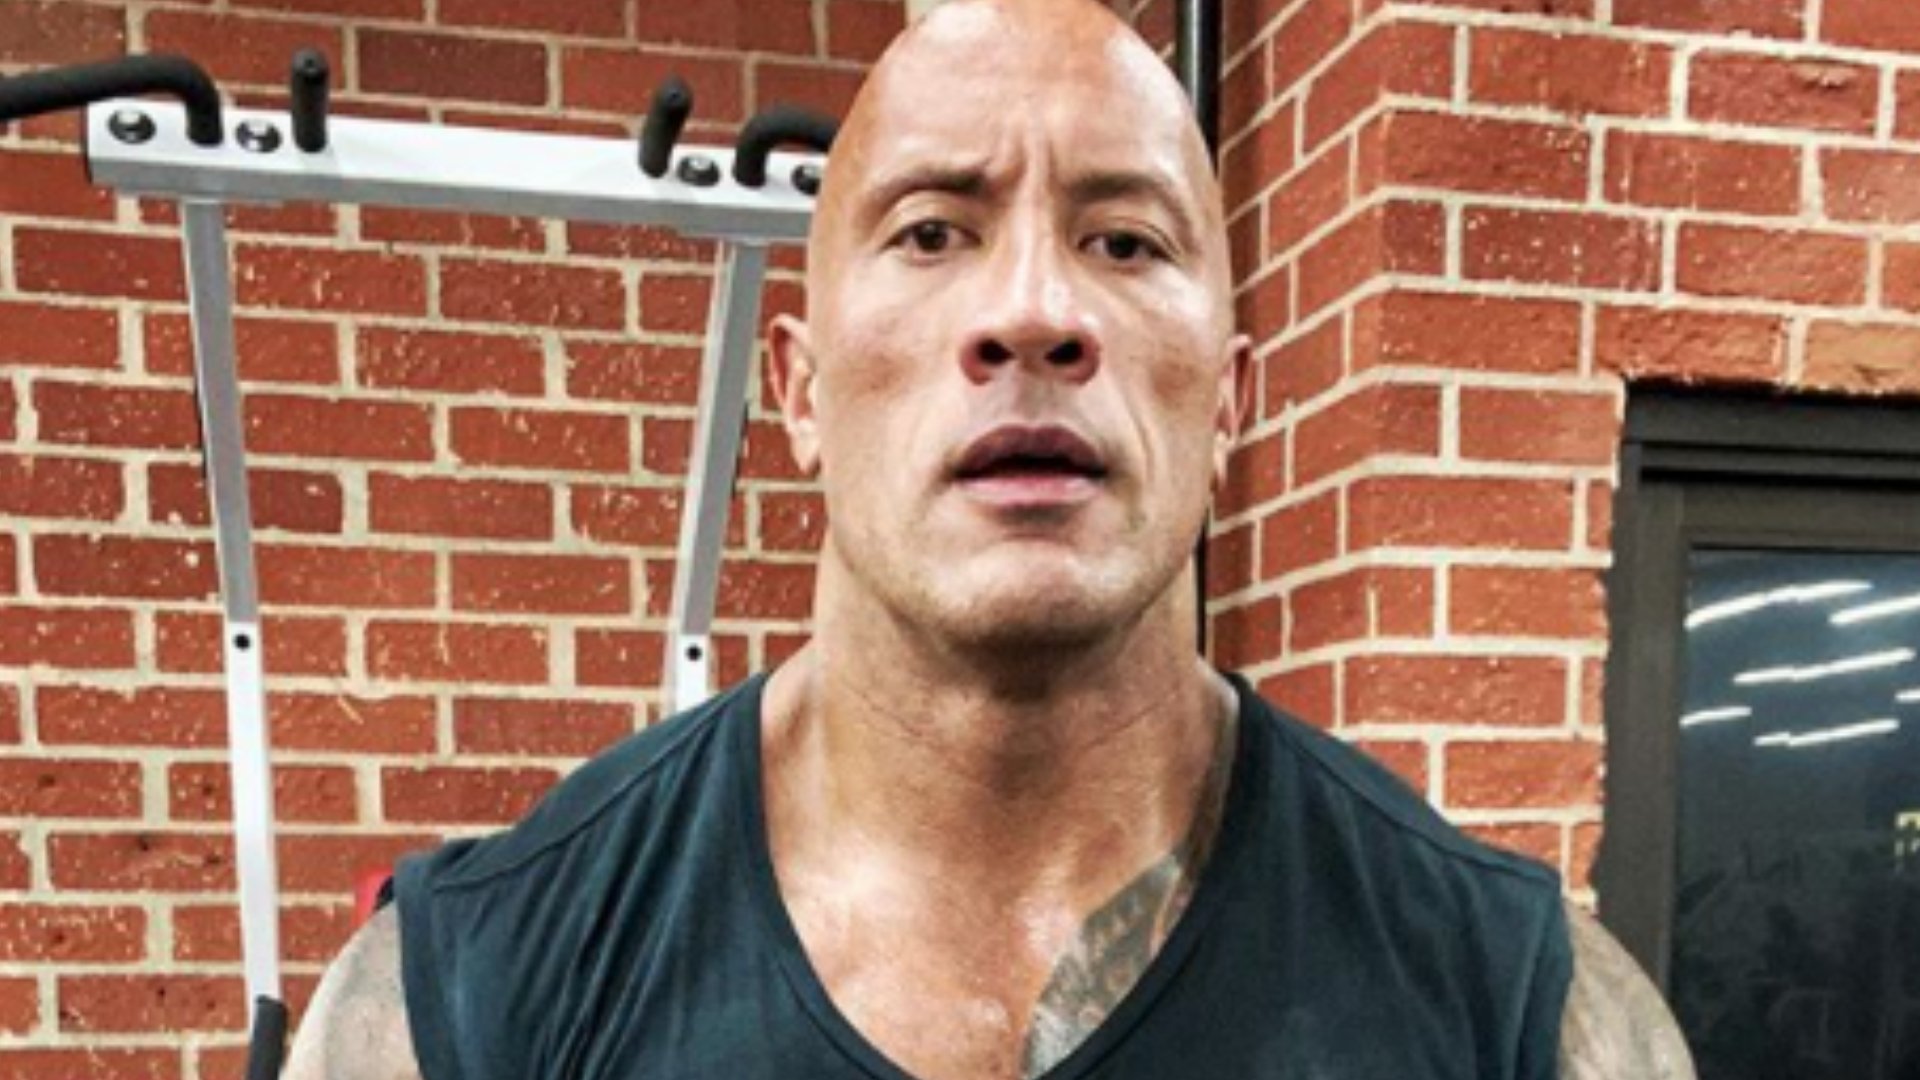 I'm excited for our players': Dwayne 'The Rock' Johnson says he